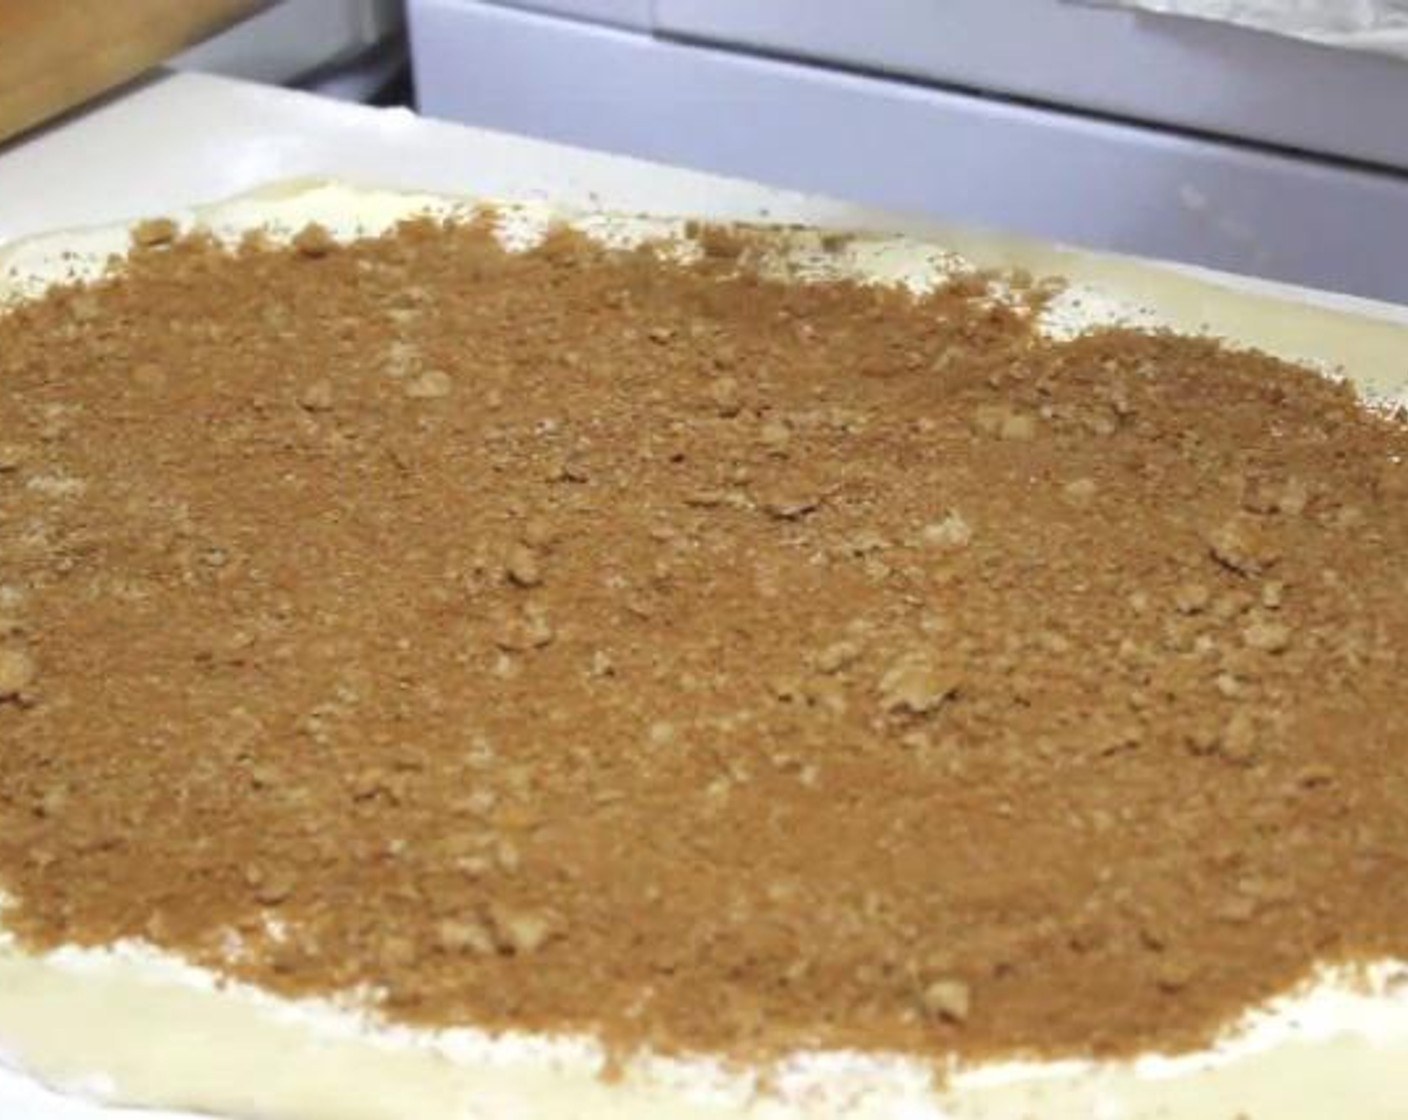 step 7 Then, take the Butter (1/3 cup) and spread it evenly over the surface of the dough. Sprinkle with a mixture of the Ground Cinnamon (2 Tbsp), and Brown Sugar (1 cup).